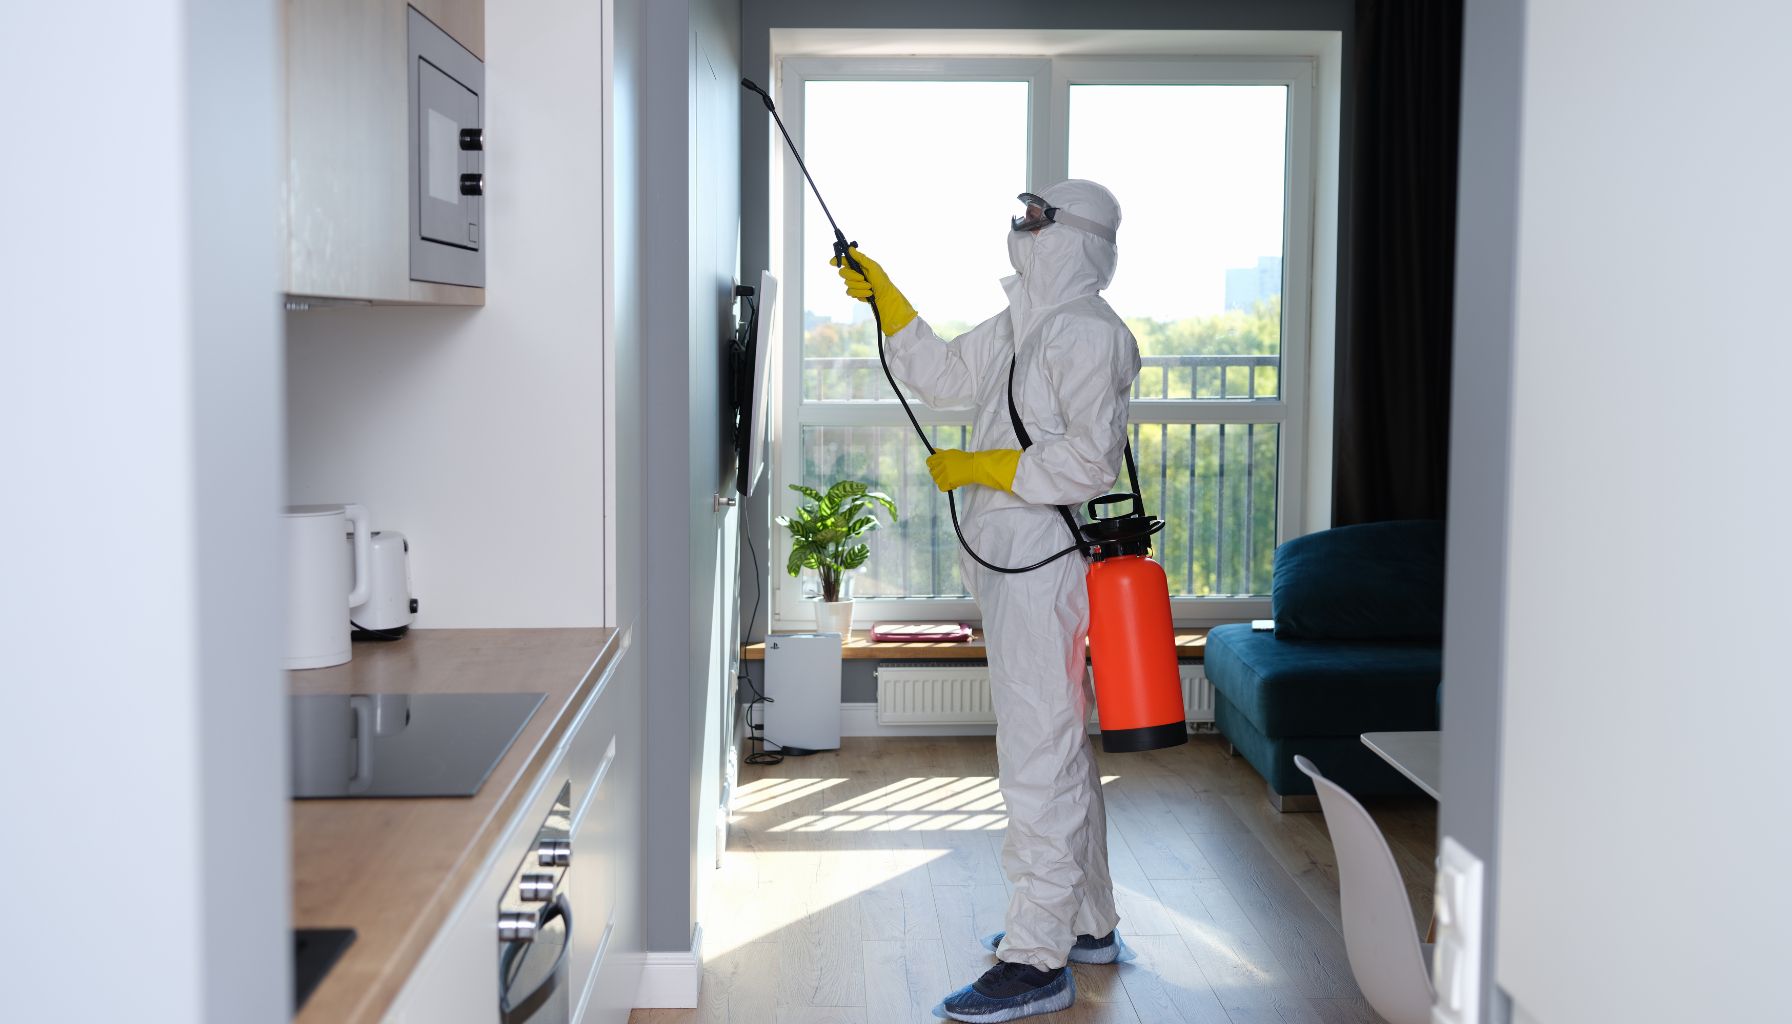 A person in a white protective suit, yellow gloves, and face mask sprays pesticide inside a modern apartment, possibly addressing mold restoration. They are holding a red and black sprayer with a hose pointed at the wall. -PureOneServices